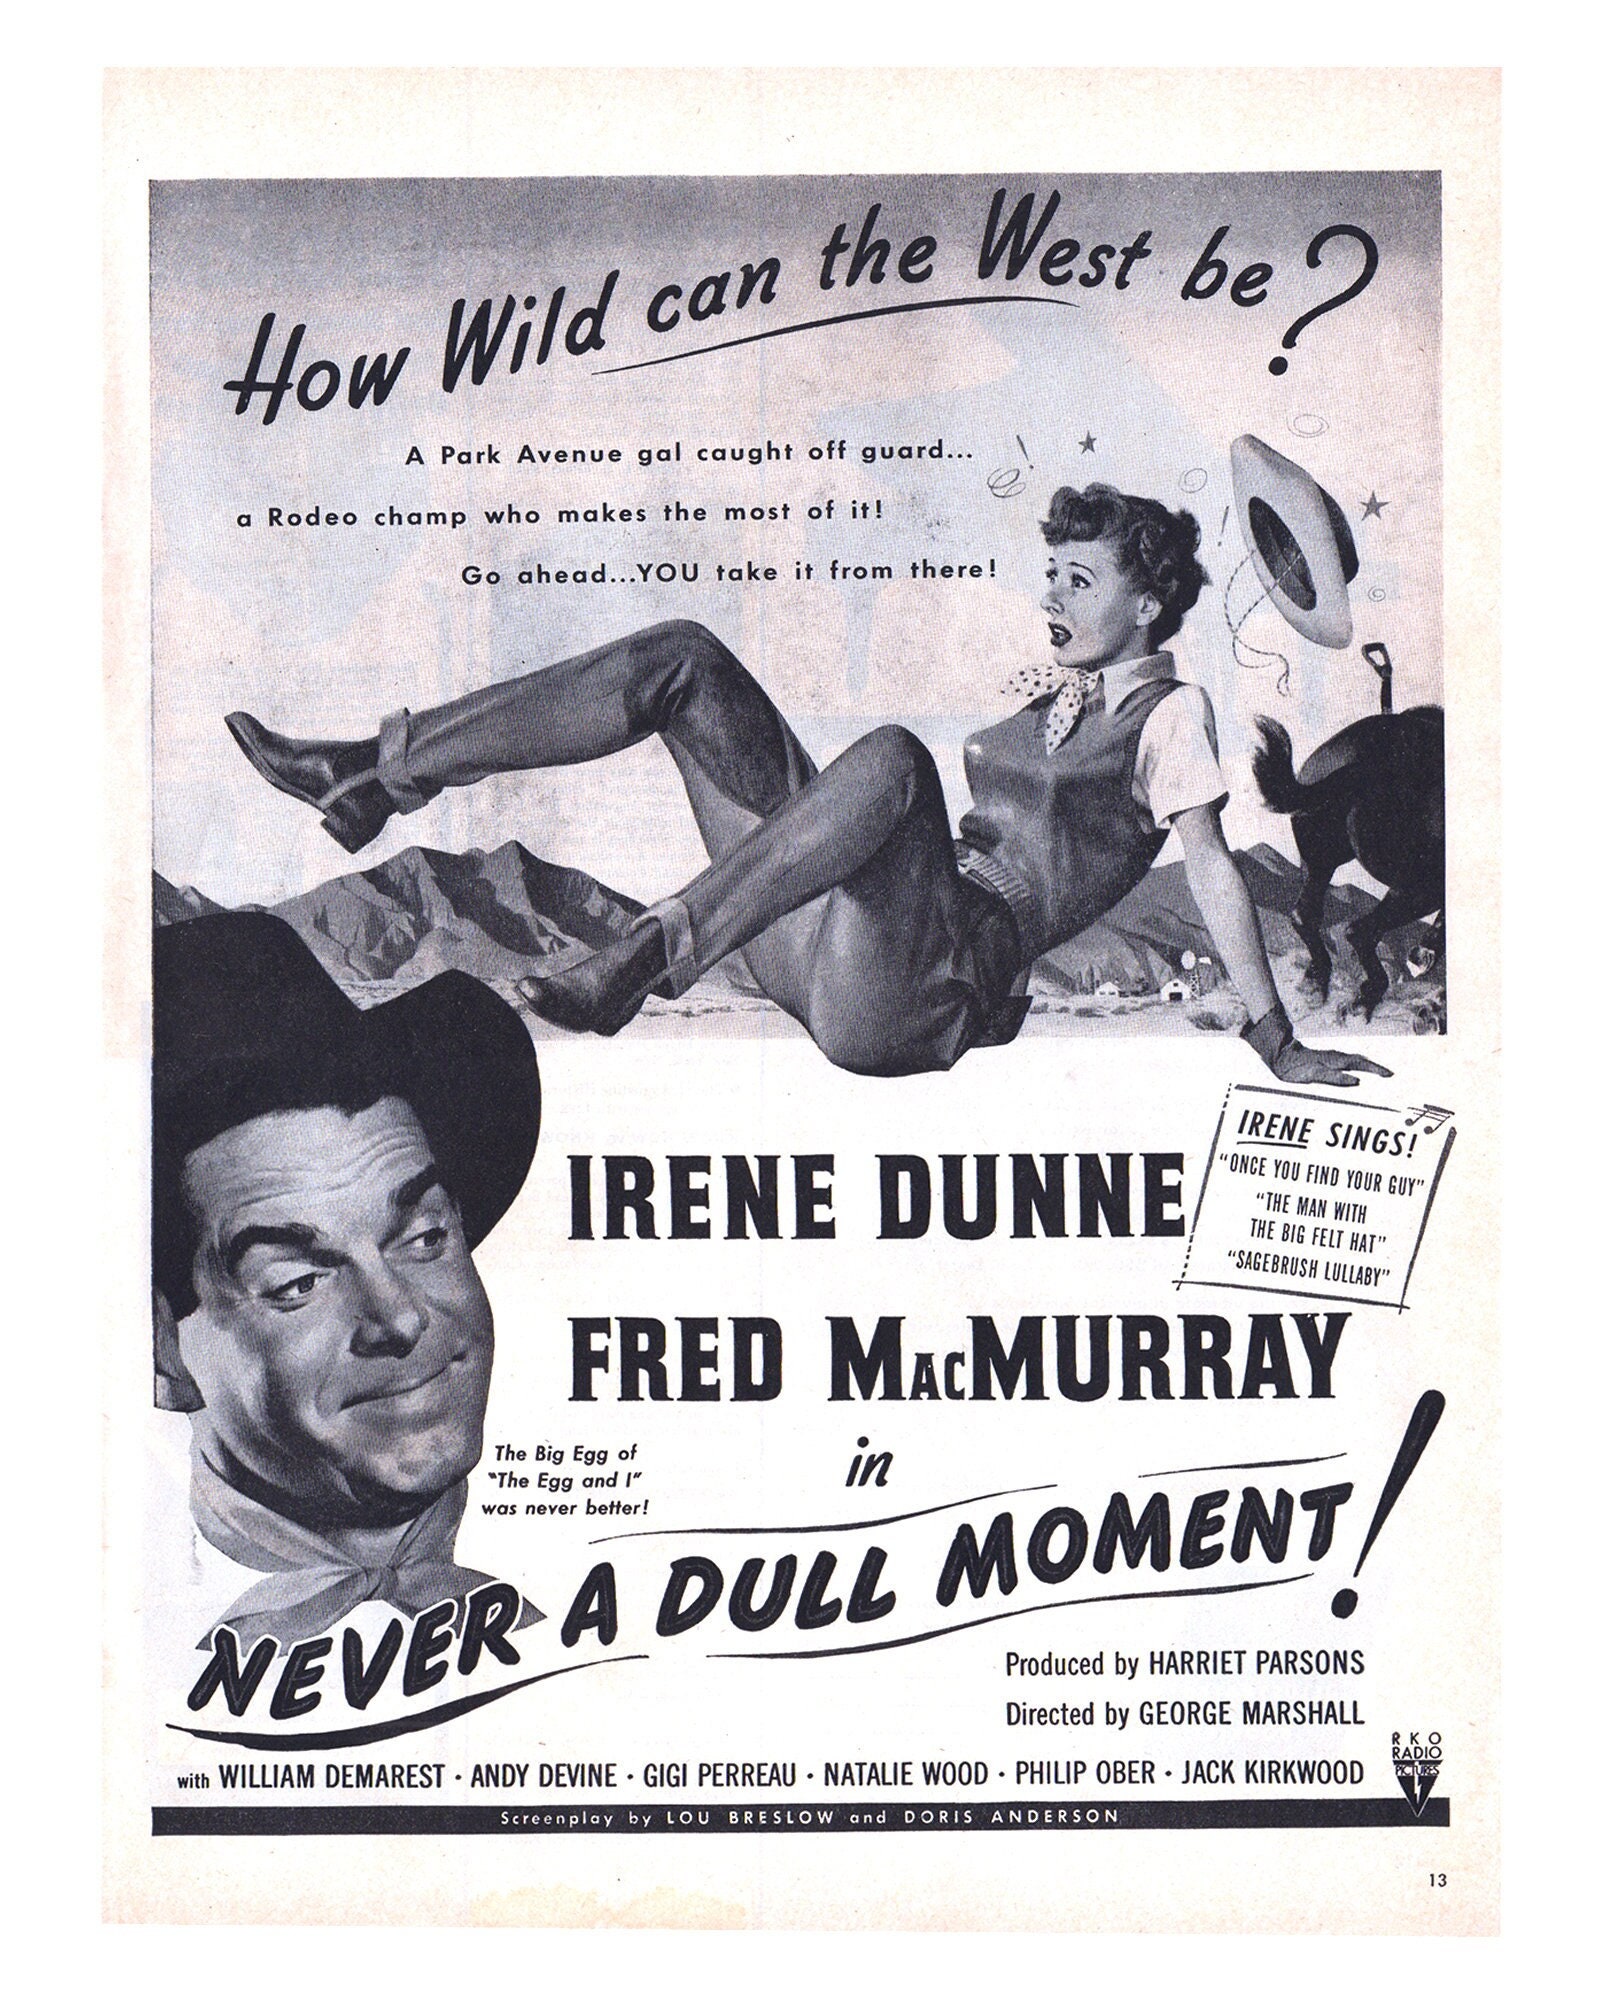 1950 never A Dull Moment Vintage Movie Ad Fred